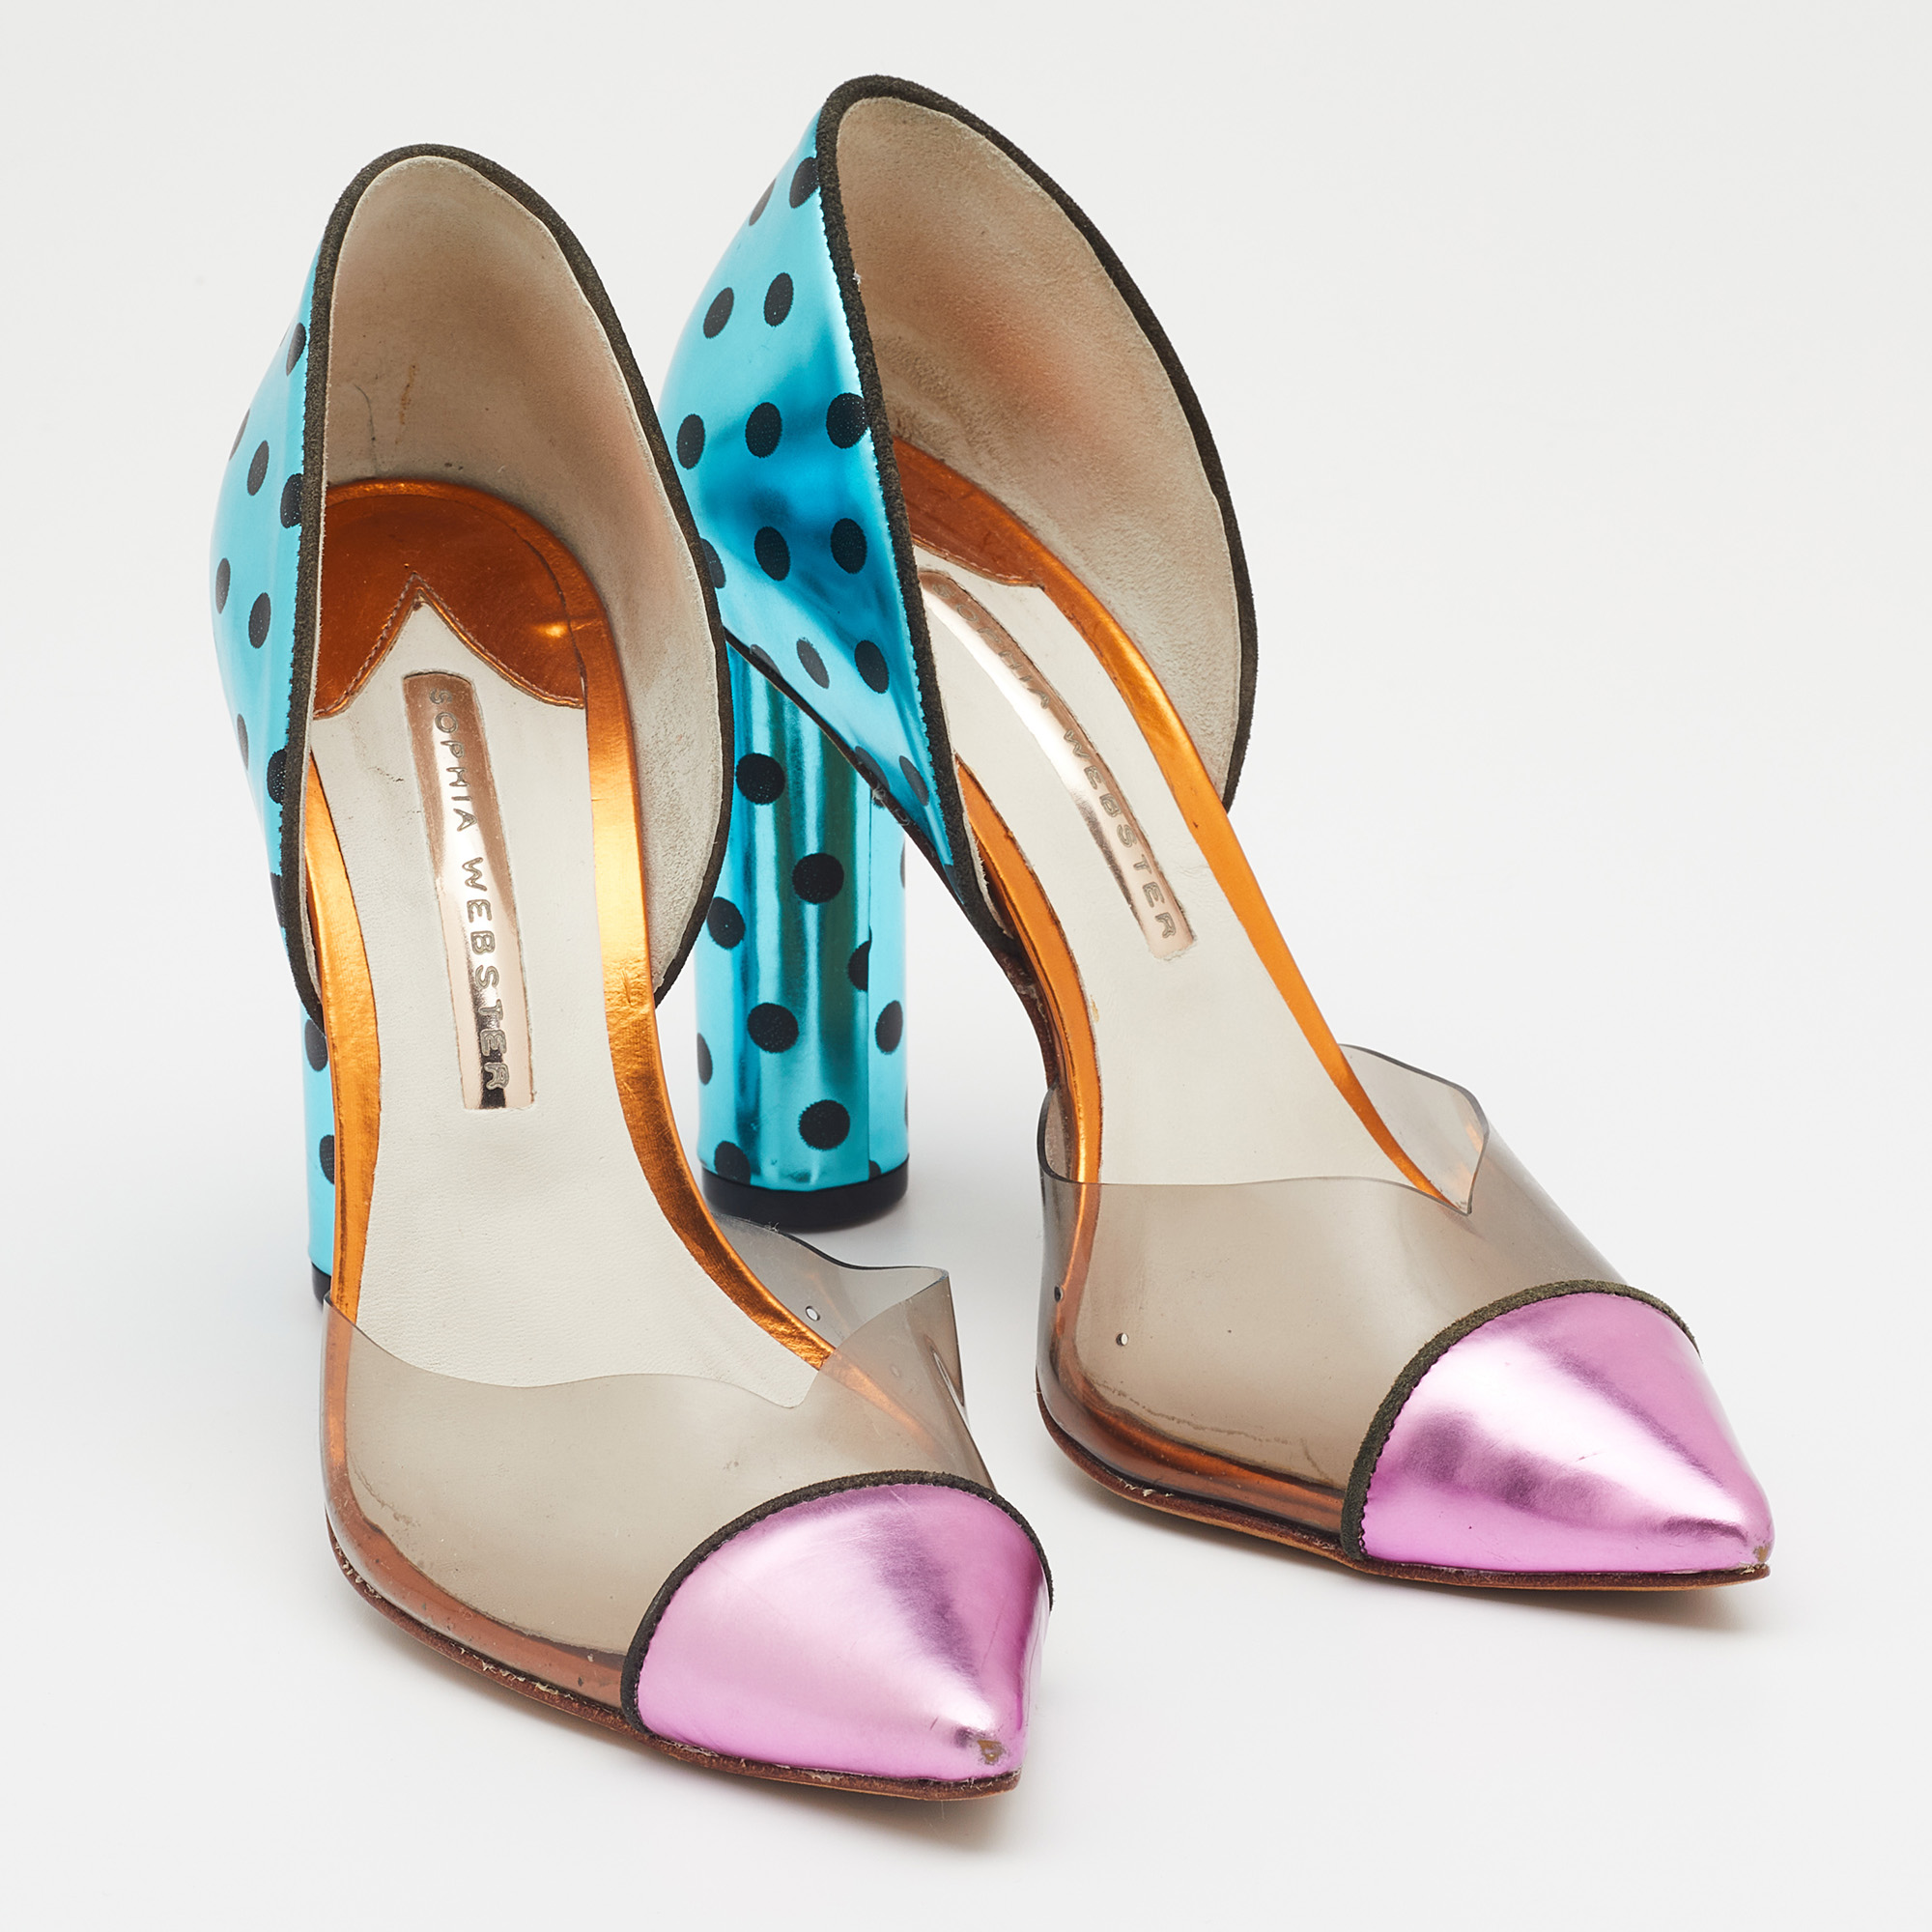 Sophia Webster Multicolor Leather And PVC Jessica Pumps Size 36